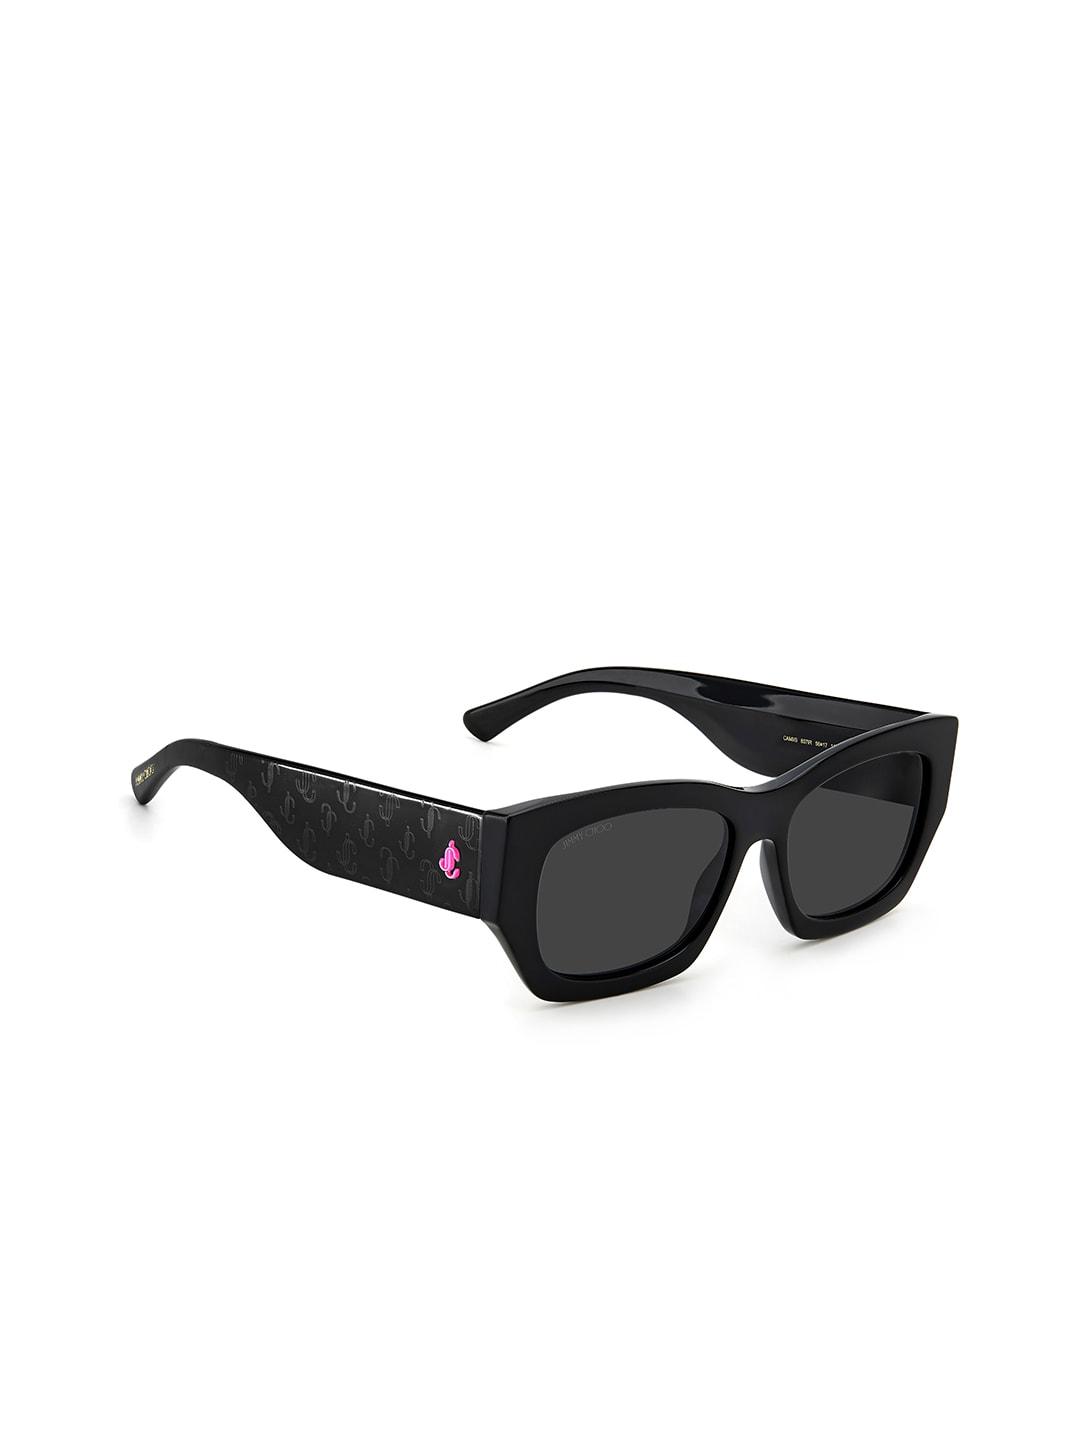 Jimmy Choo Women Square Sunglasses With UV Protected Lens